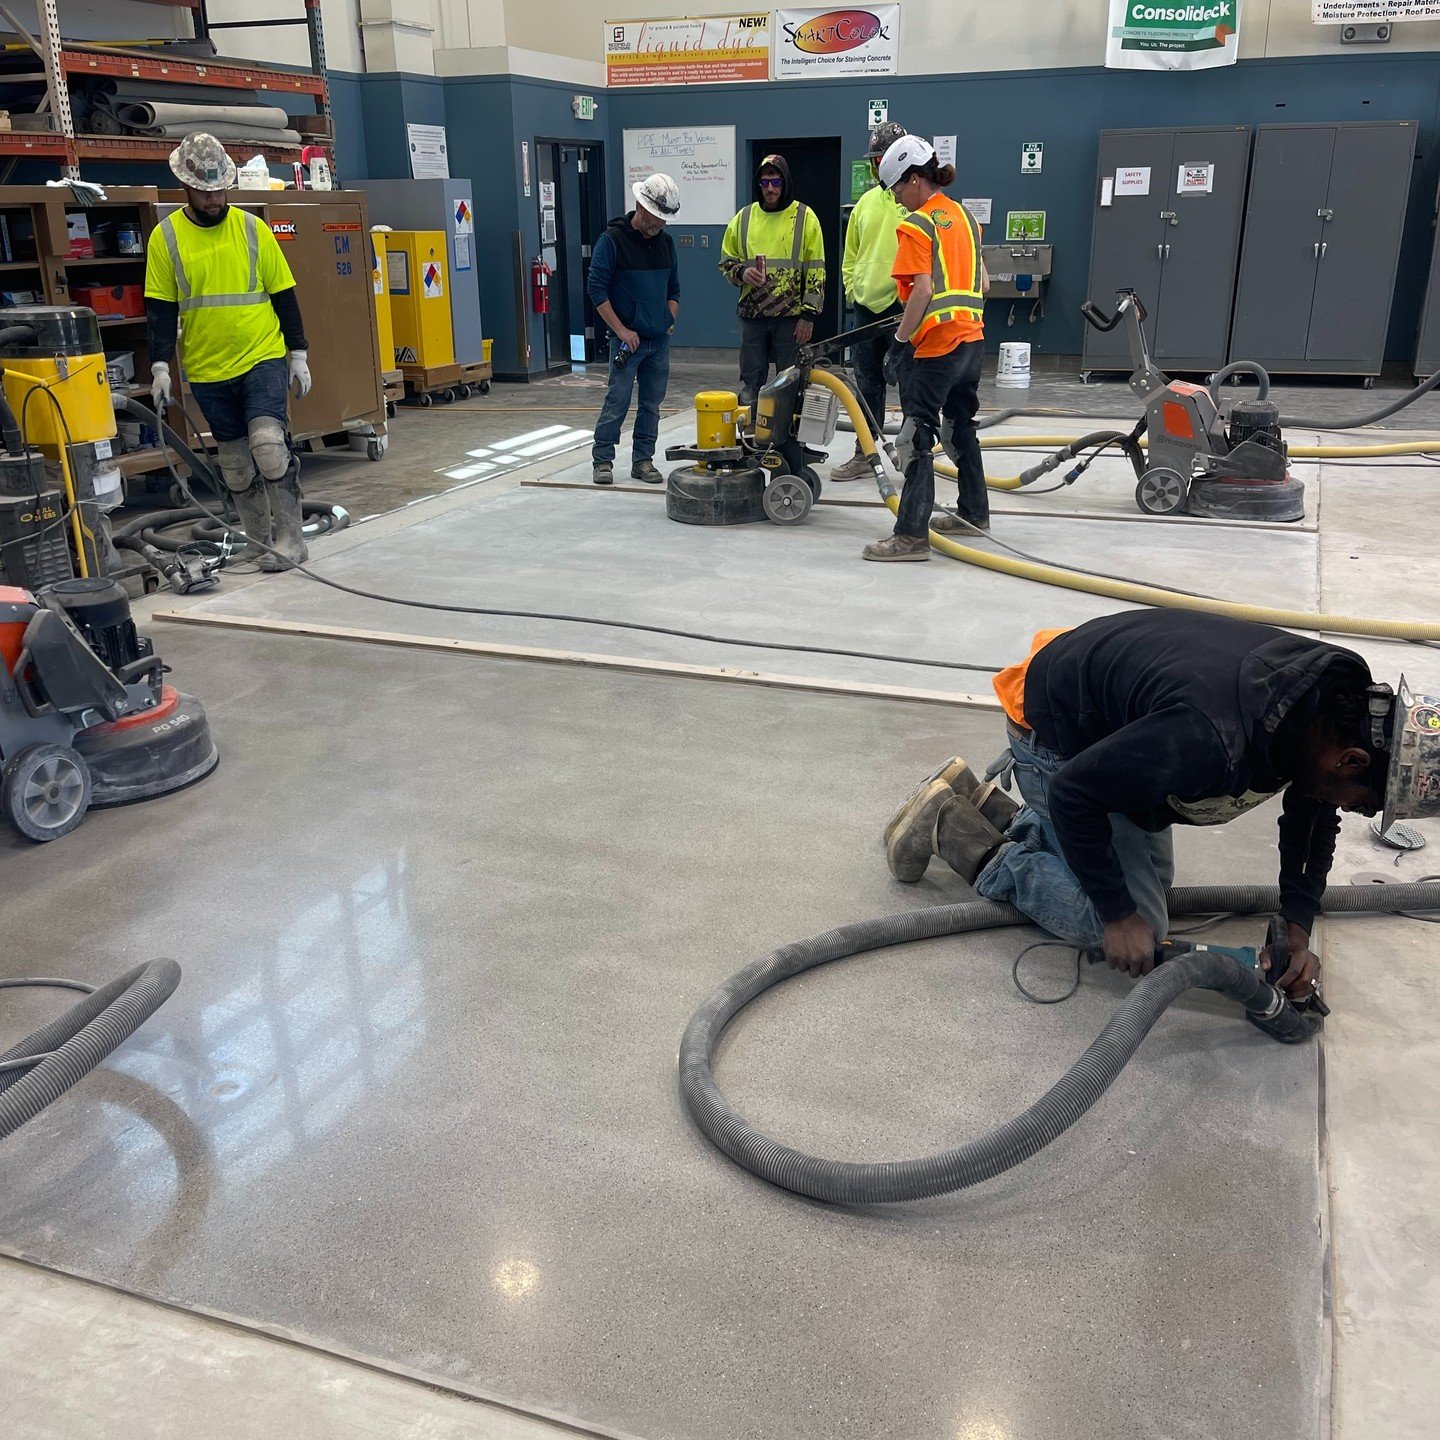 Thank you Warren Storrs, Glen Ryseff and Dave Landry for donating your time and material for a Polish Overlay Class at the Cement Masons Apprenticeship. The Euclid products used were: Eucofloor Epoxy Primer sand broadcasted to refusal with 14-50# 
&a